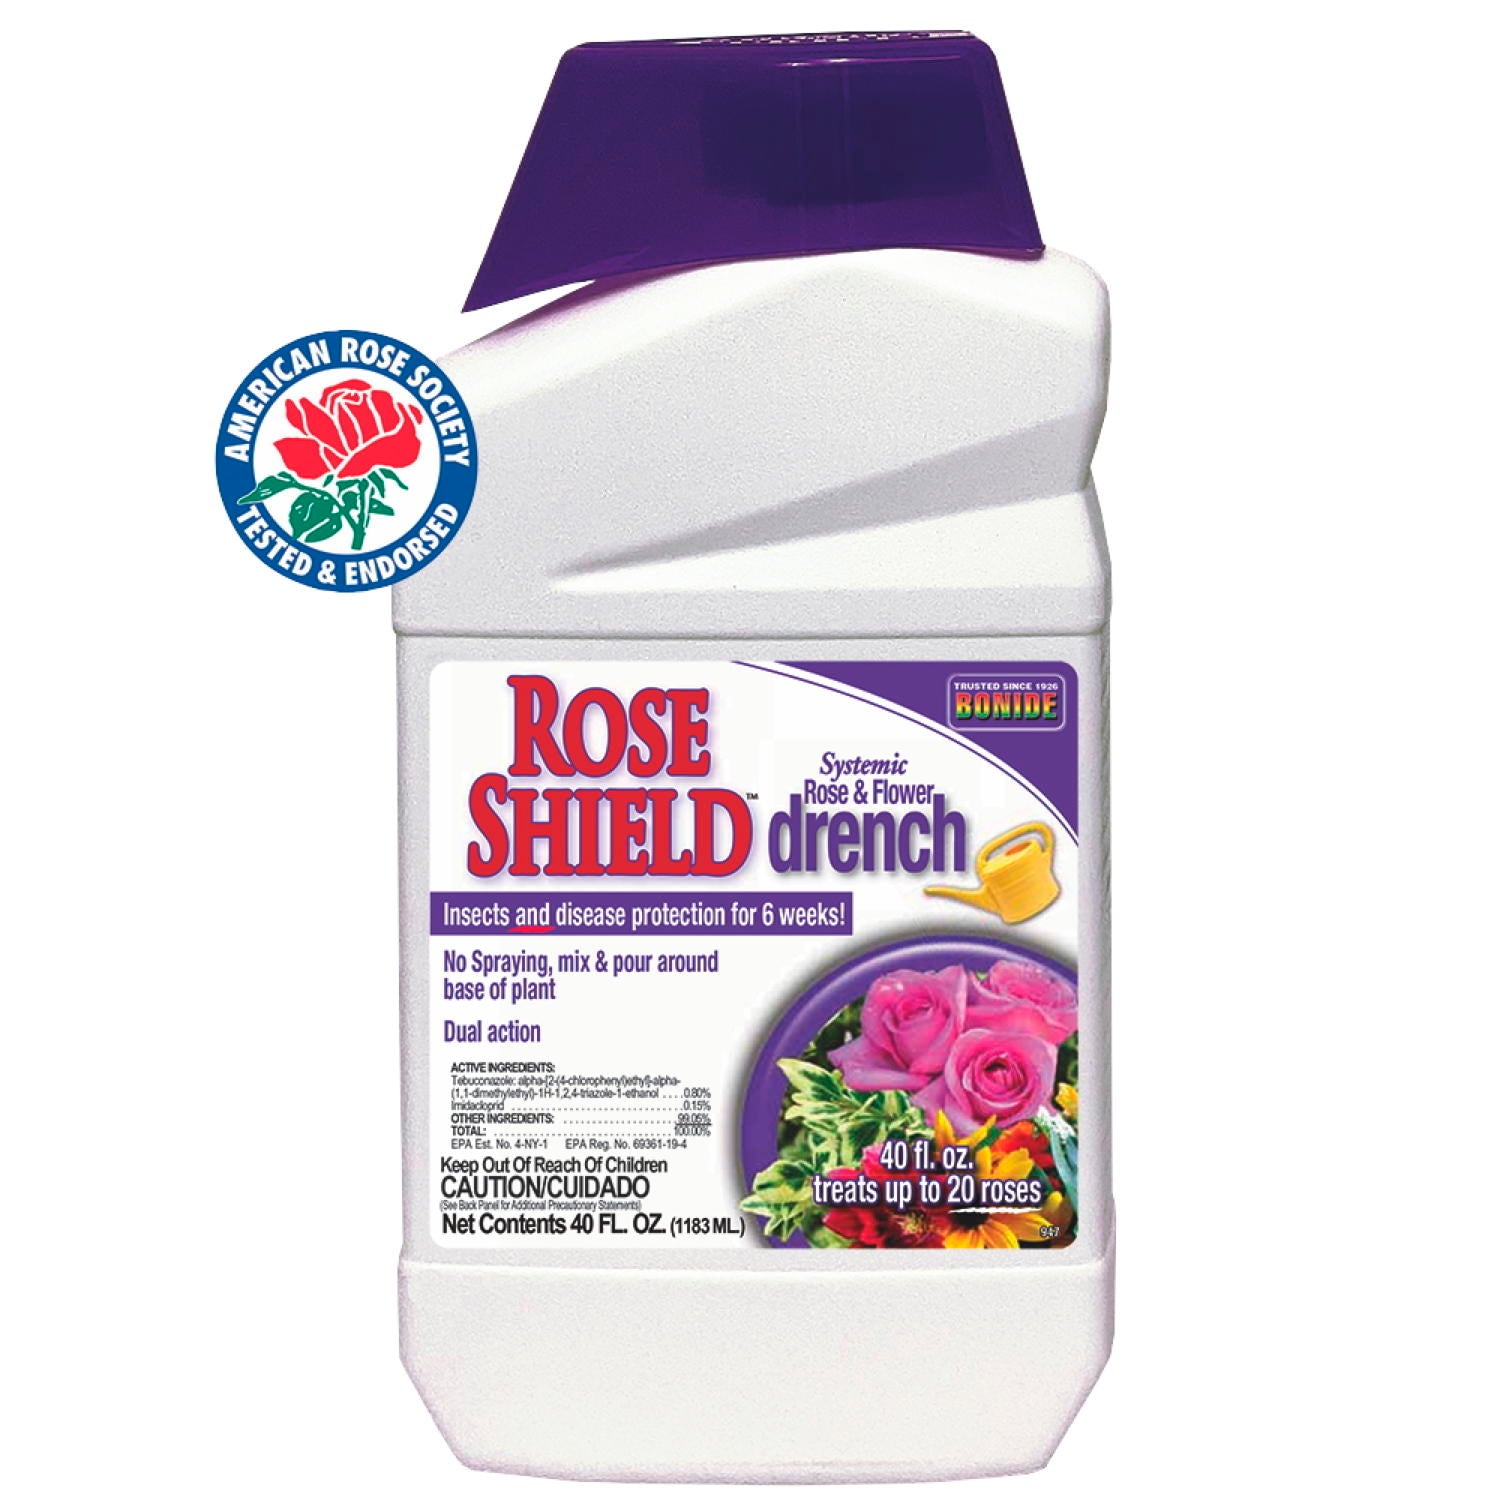 Amazing disease, insect and fungal protection for Rose Bushes, Shrubs and Ornamentals. Drench application.